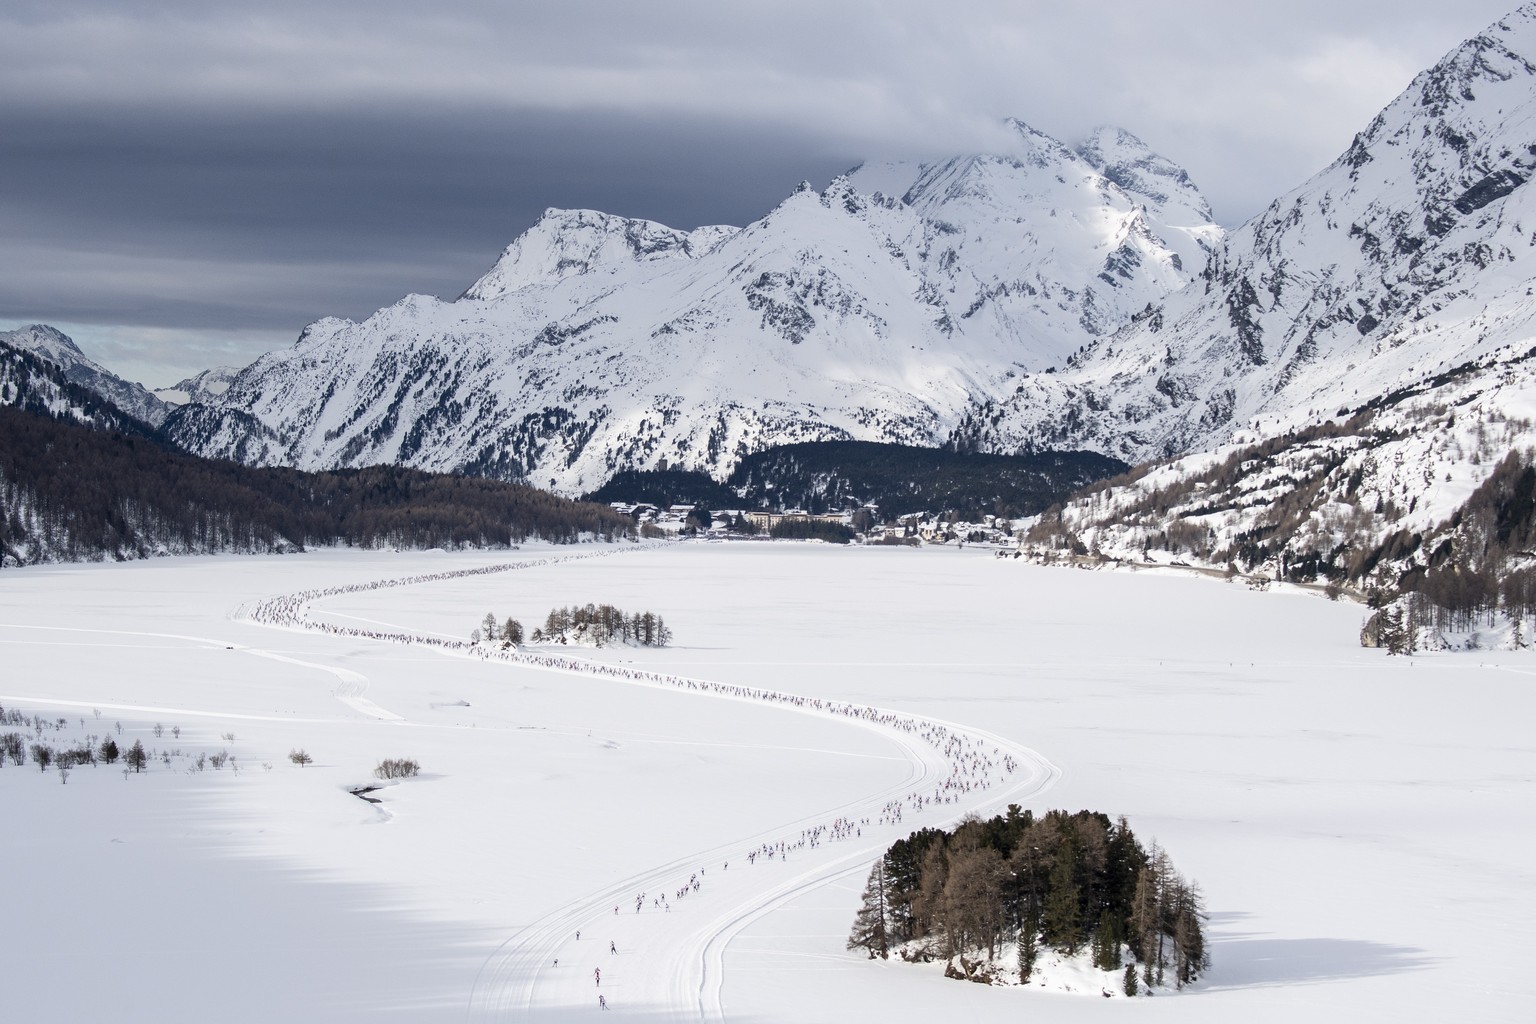 epa07426591 Athletes compete on the way from Maloya to S-Chanf during the 51st annual Engadin skiing marathon in Sils, Switzerland, 10 March 2019. EPA/ENNIO LEANZA